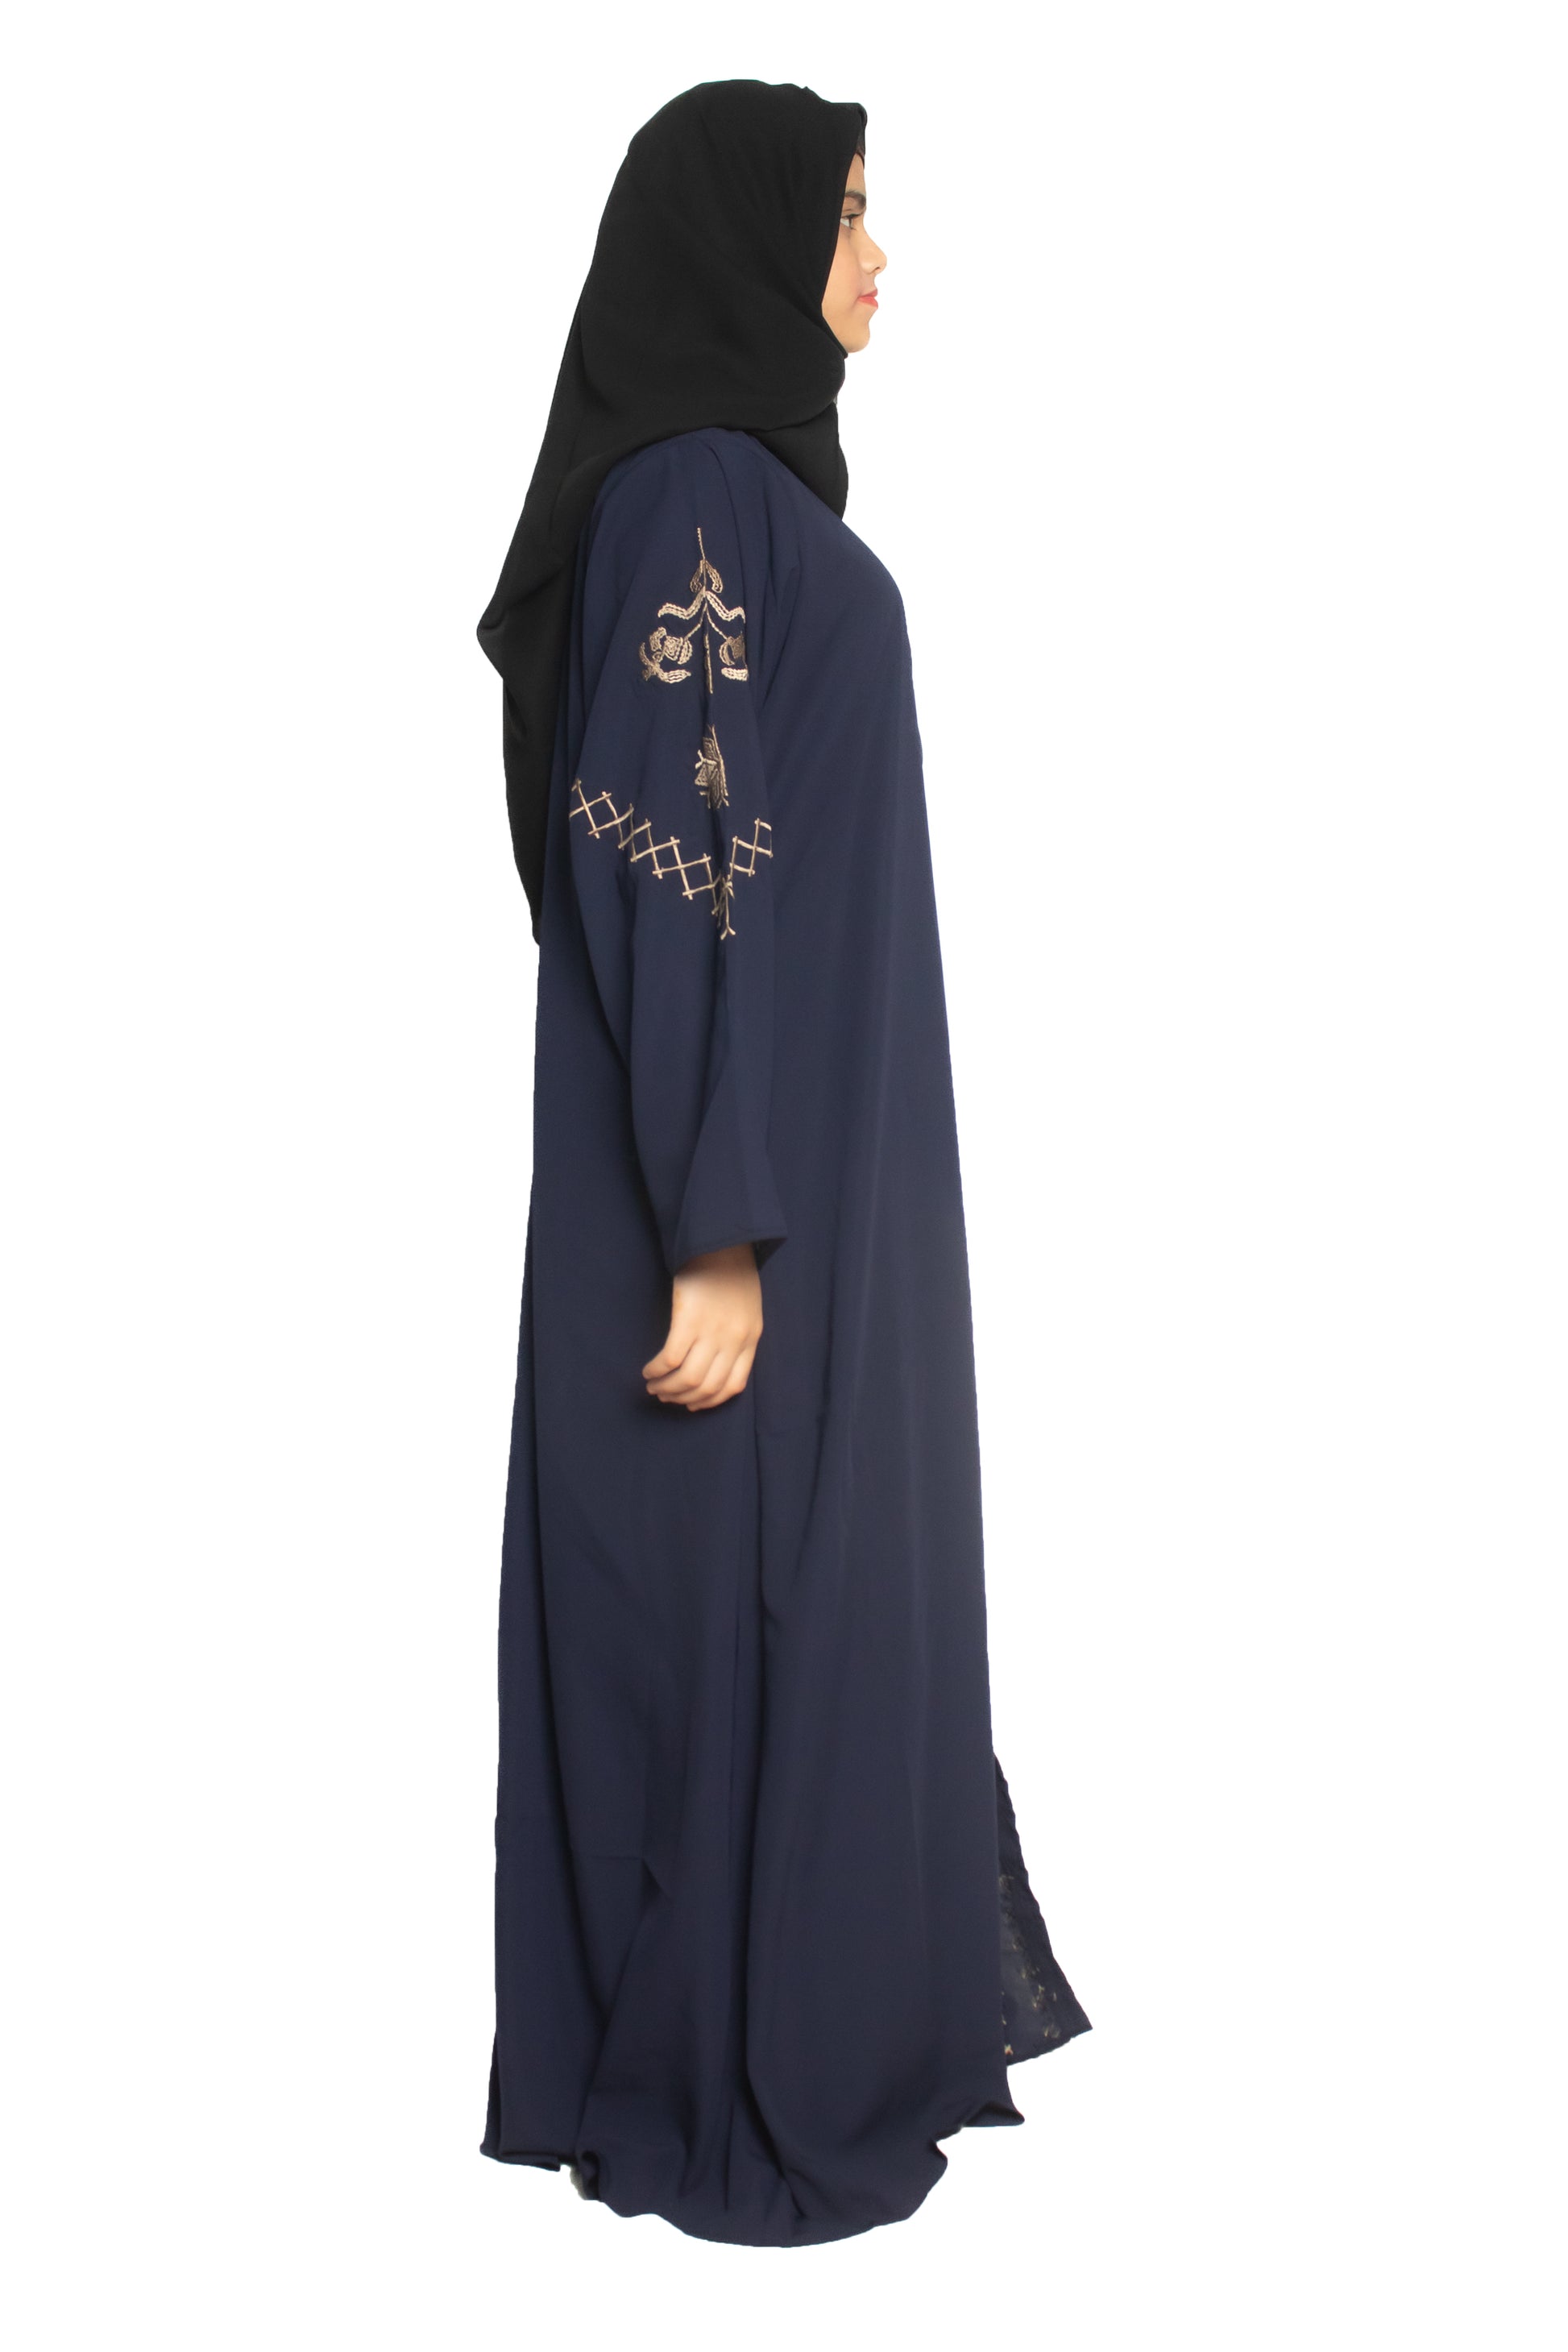 Modest City Self Design Front Open Zip Embroidered Blue Crepe Fabric Abaya or Burqa with Hijab for Women & Girls-Series Laiba